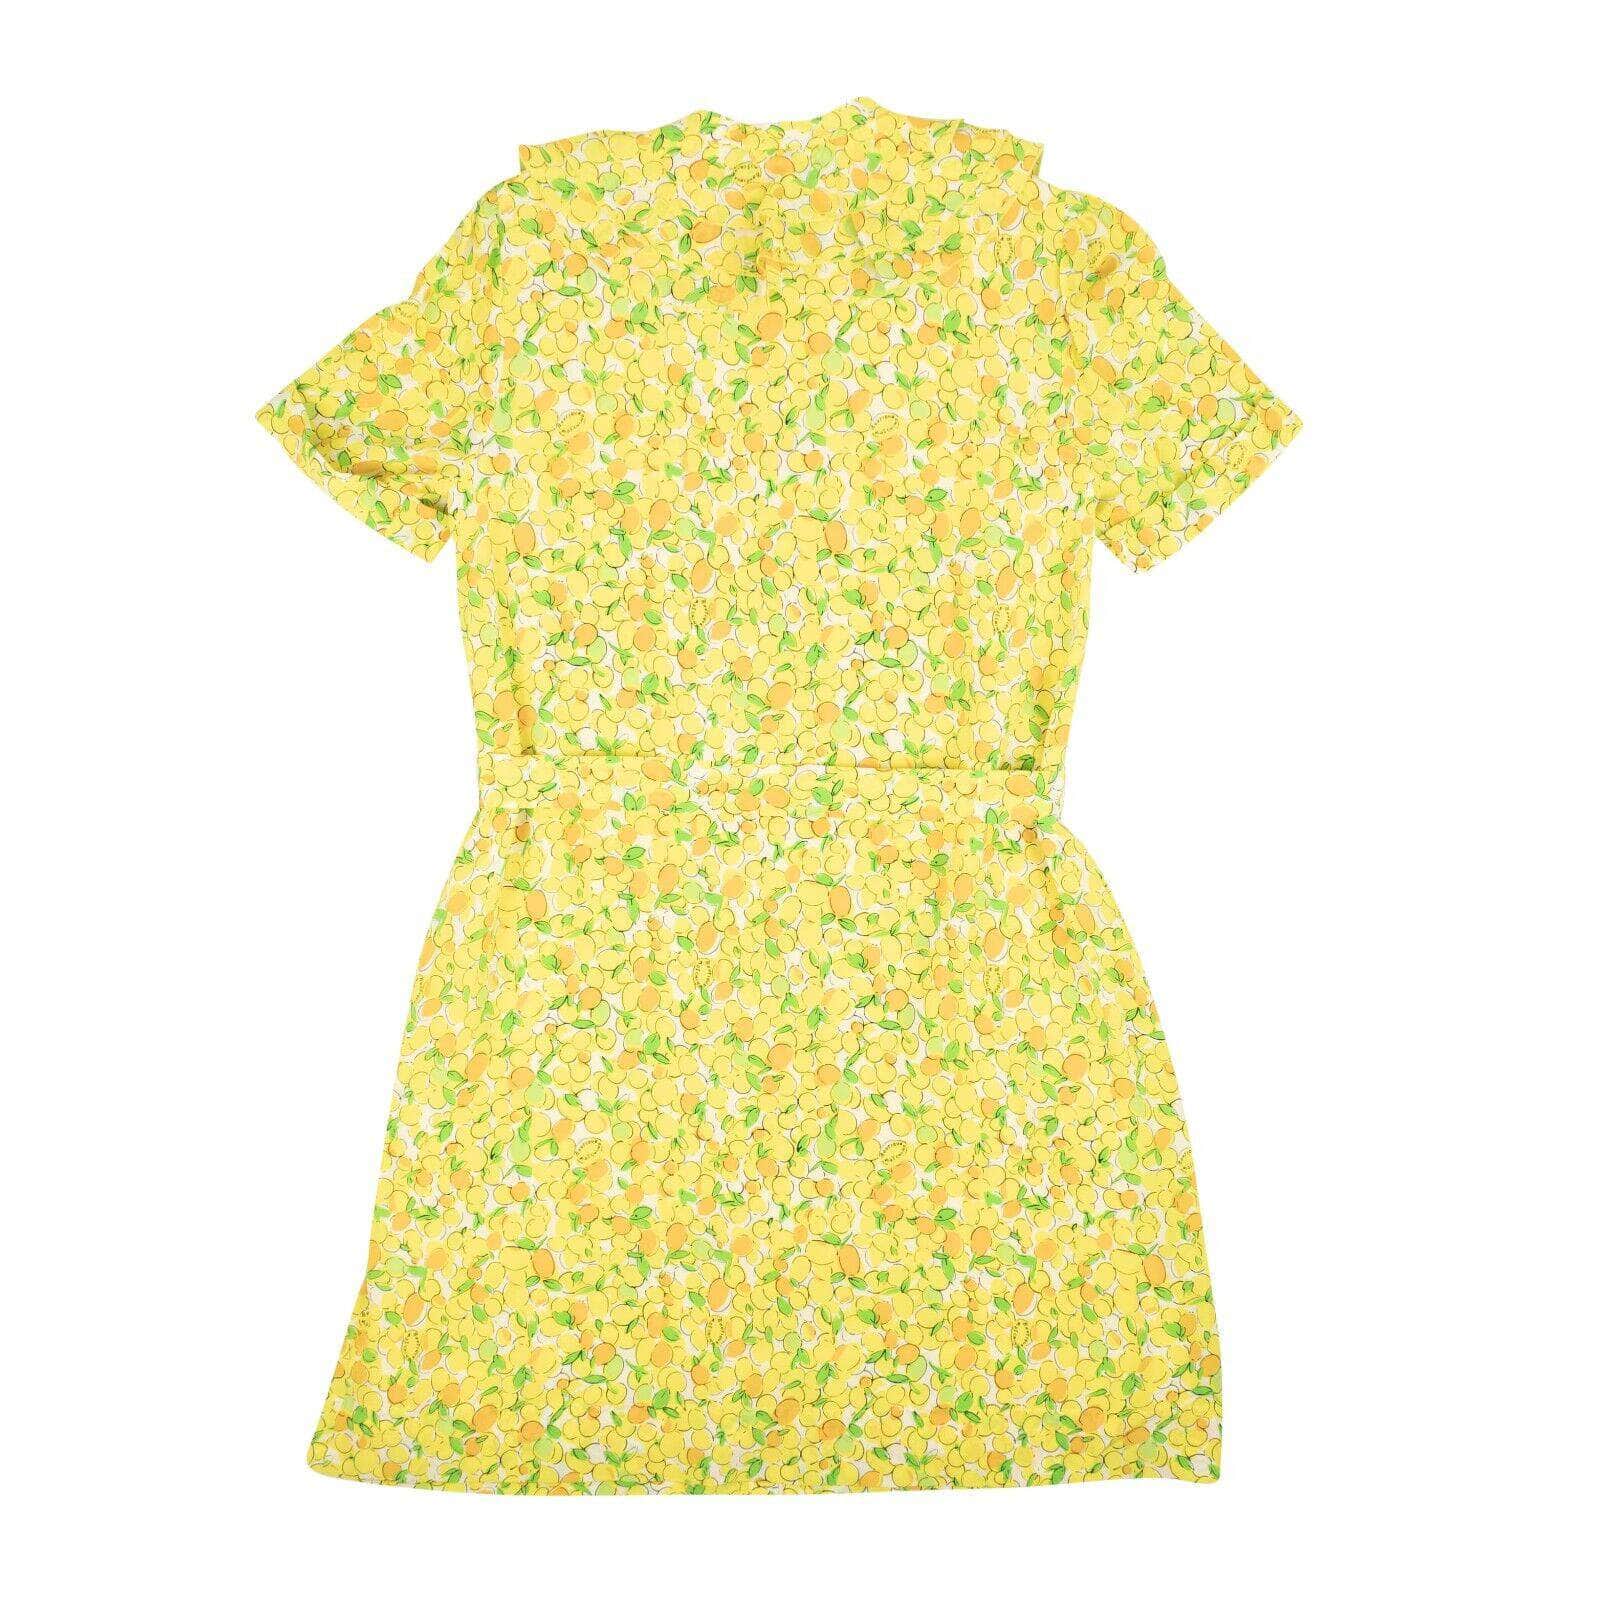 BOUTIQUE MOSCHINO 250-500, boutique-moschino, channelenable-all, chicmi, couponcollection, gender-womens, main-clothing, size-40, size-42, size-44, size-46, womens-day-dresses Yellow Lemon Print Silk Ruffle Neck Dress